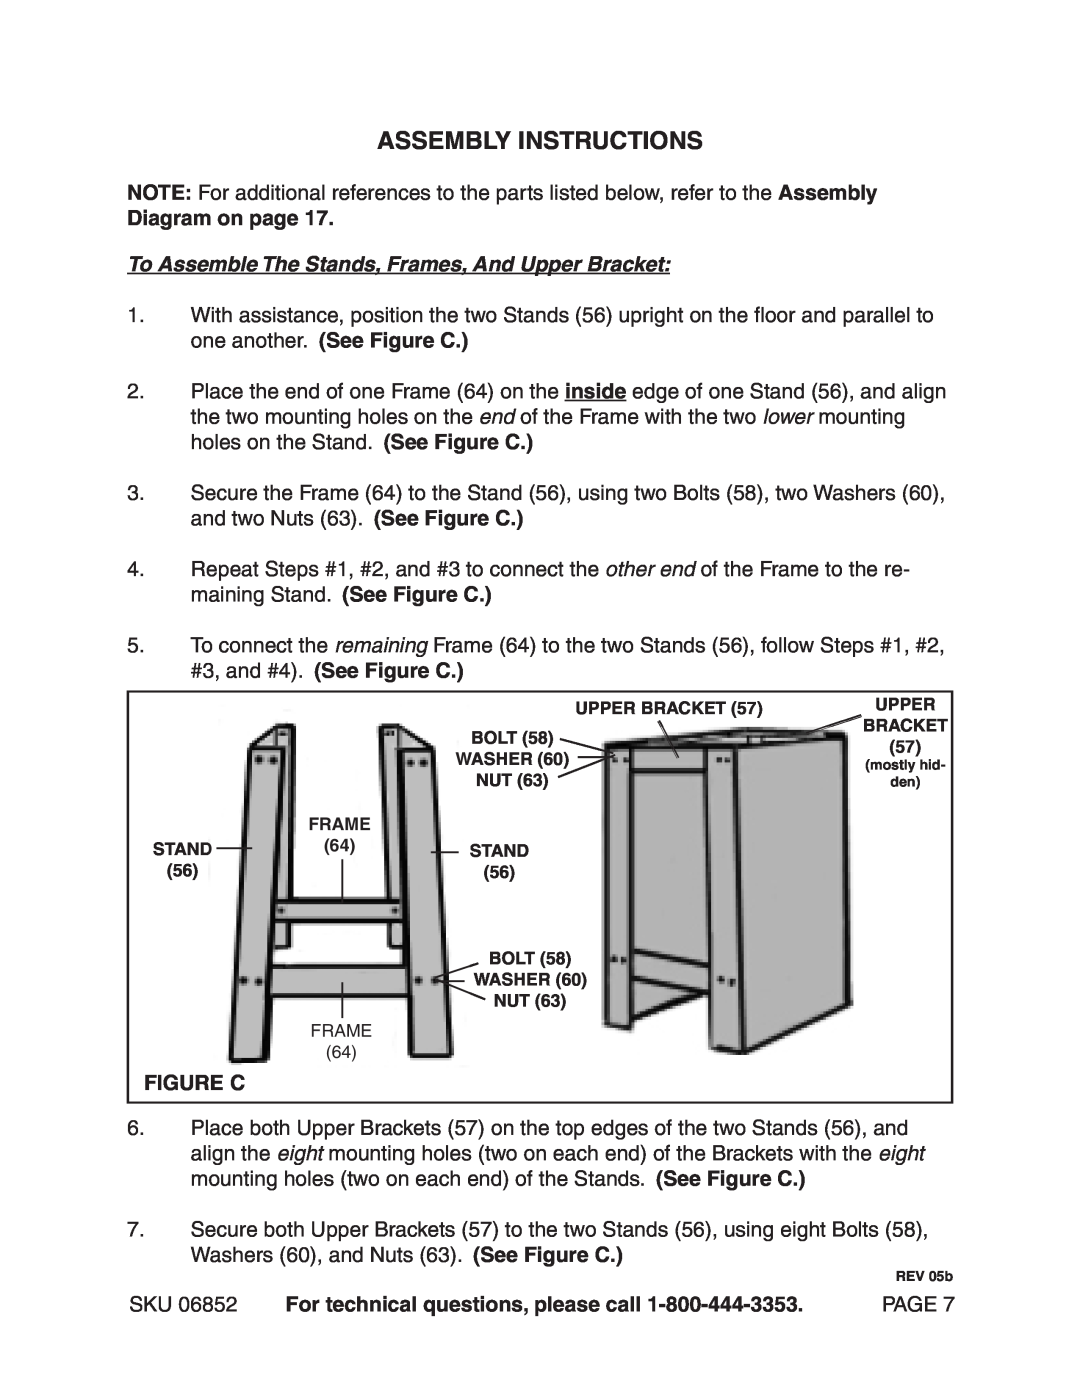 Harbor Freight Tools 6852 Assembly Instructions, Diagram on page, To Assemble The Stands, Frames, And Upper Bracket 